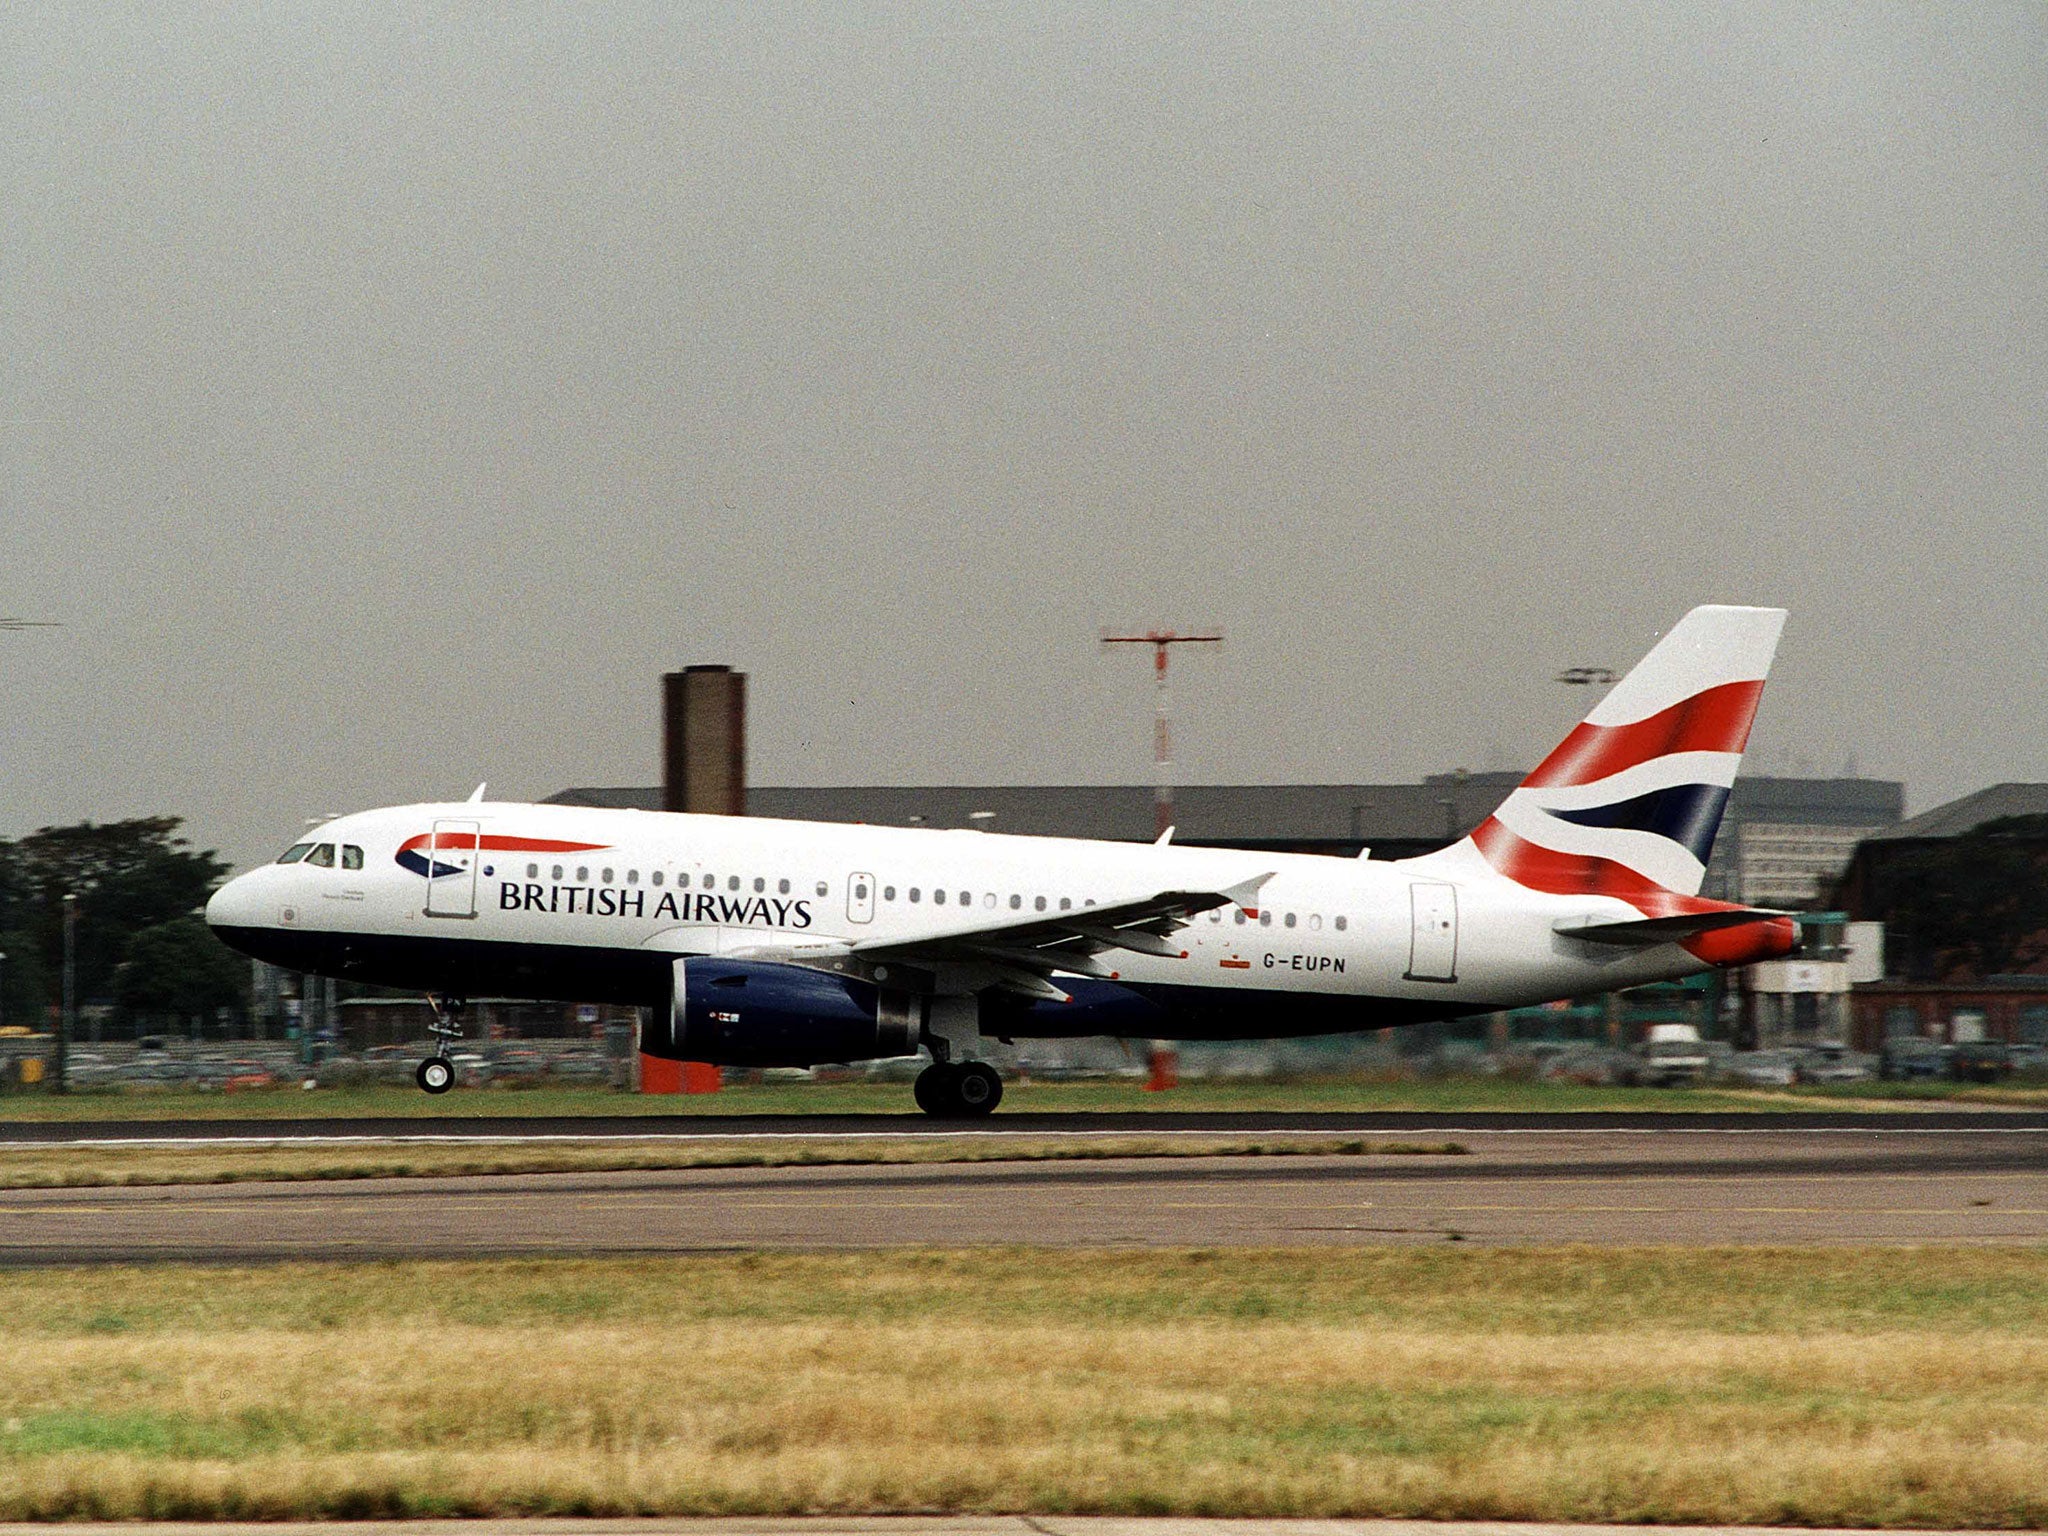 File image: A British Airways Airbus comes in to land at Heathrow airport in London. A BA flight had to make an emergency landing at the airport after it experienced an 'engine surge' during take-off